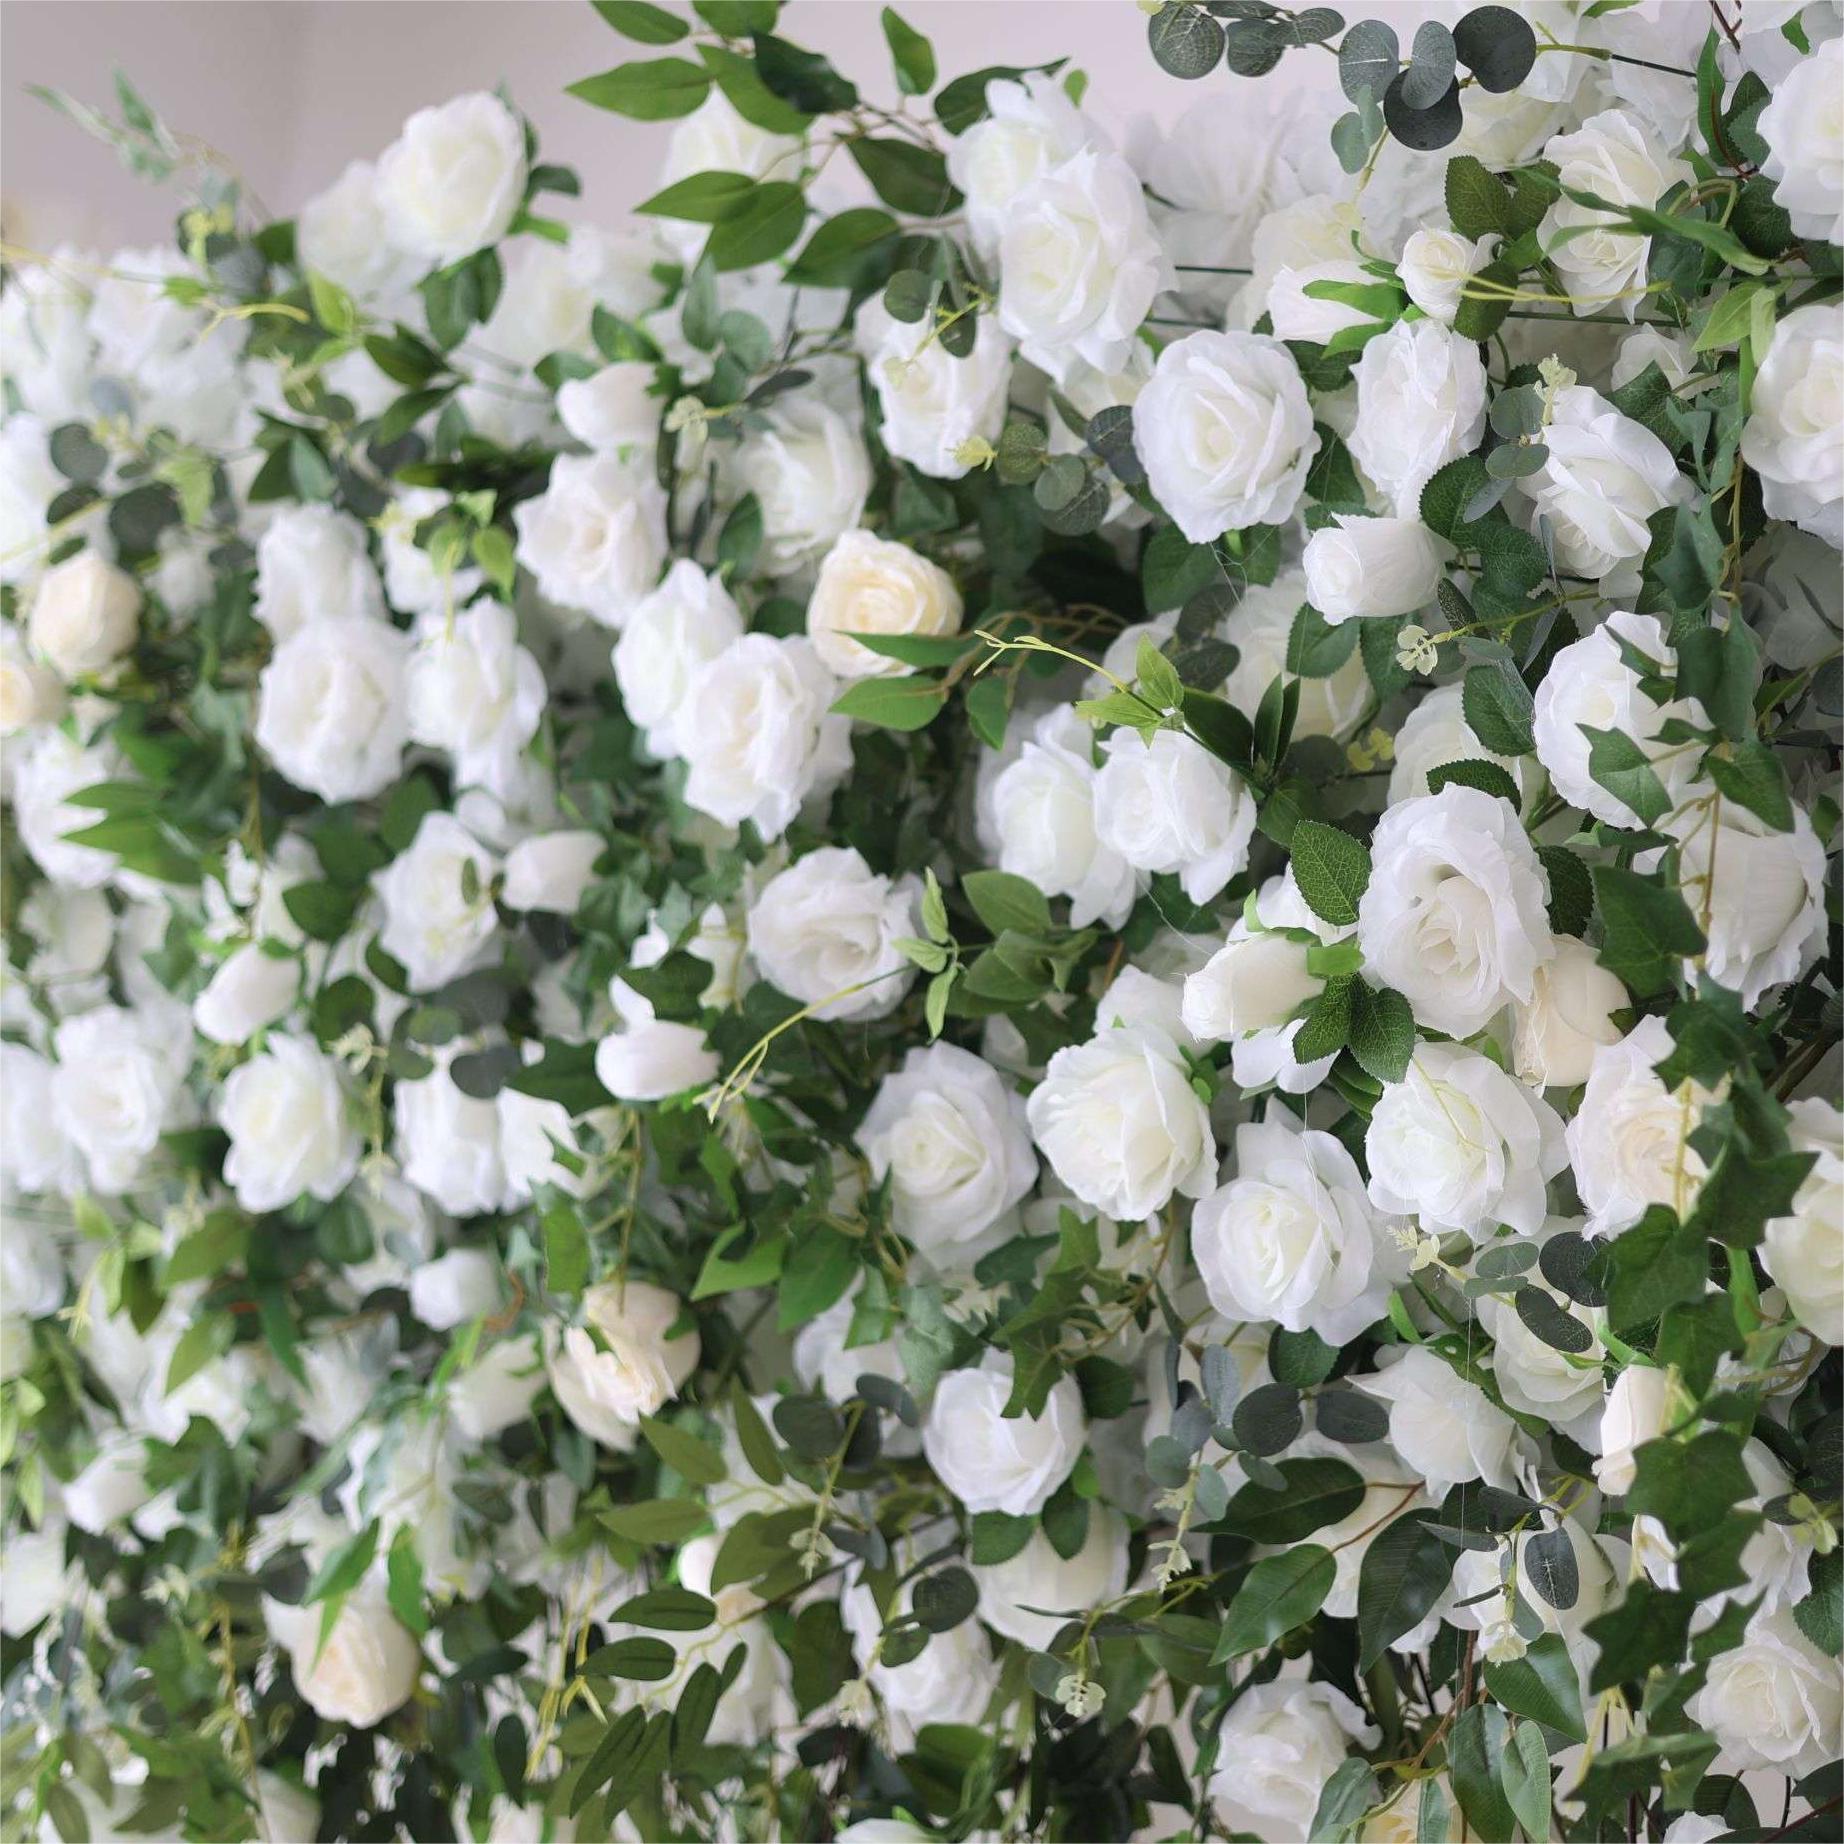 Flower Wall White Green Florals Cover Wedding Party Proposal Decor